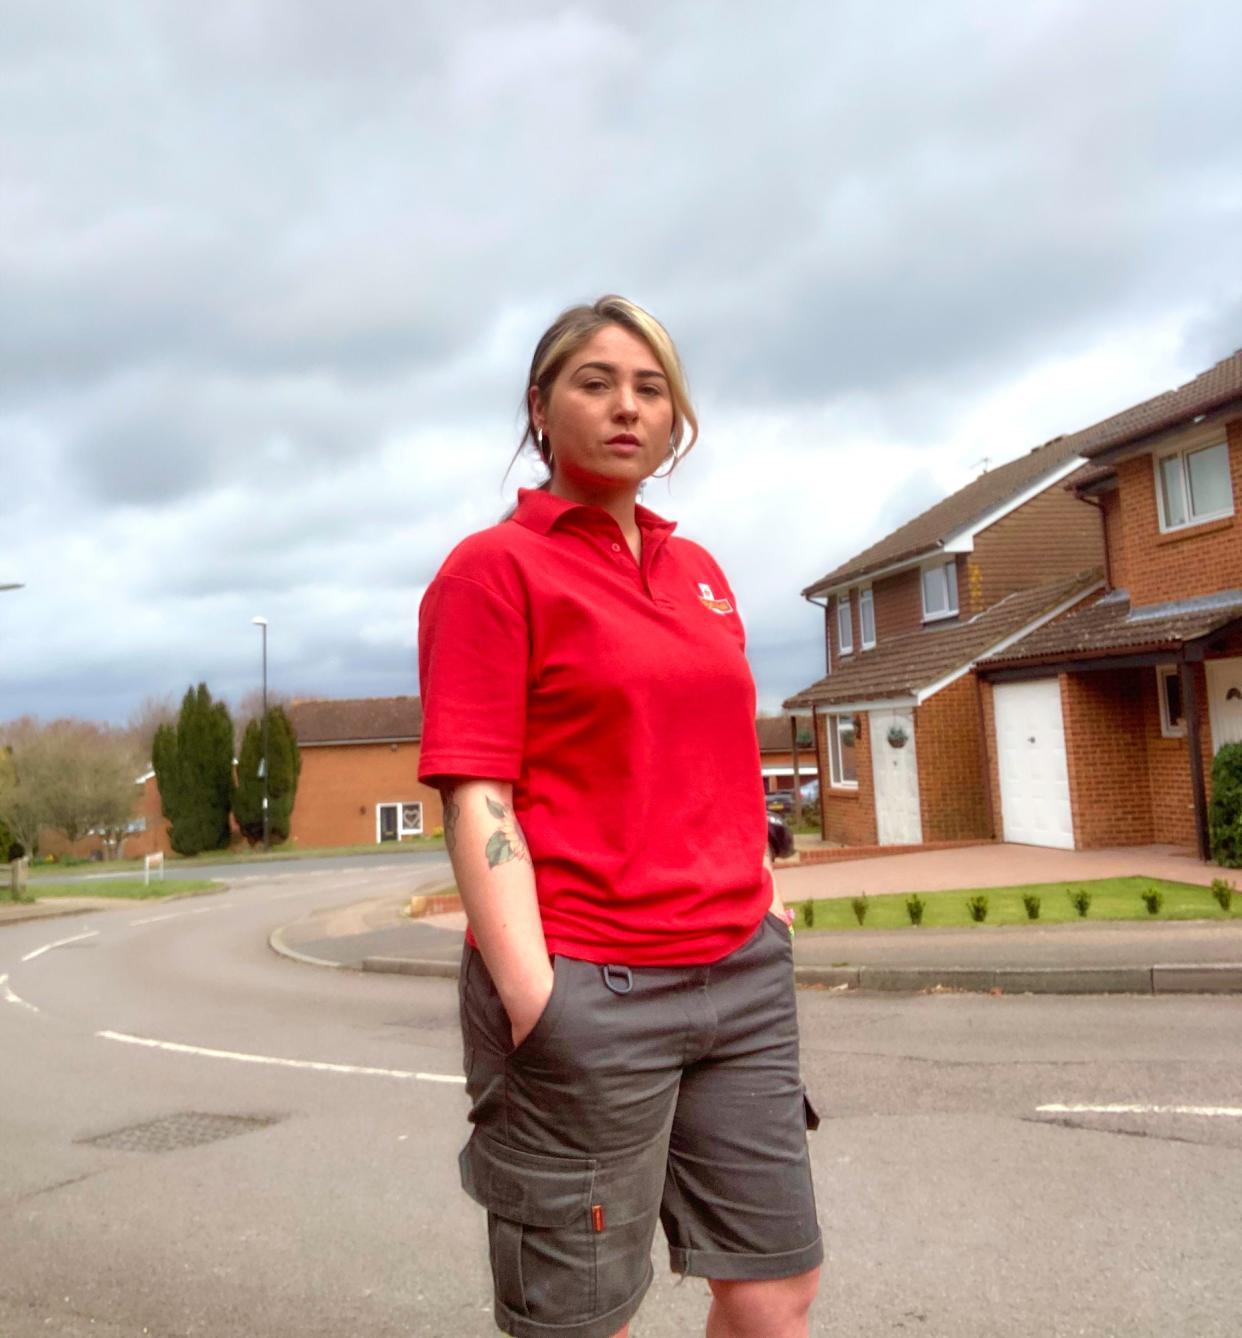 Postwoman says she routinely feels scared and in danger while doing her job  (Eliza Hatch / Cheer Up Luv)